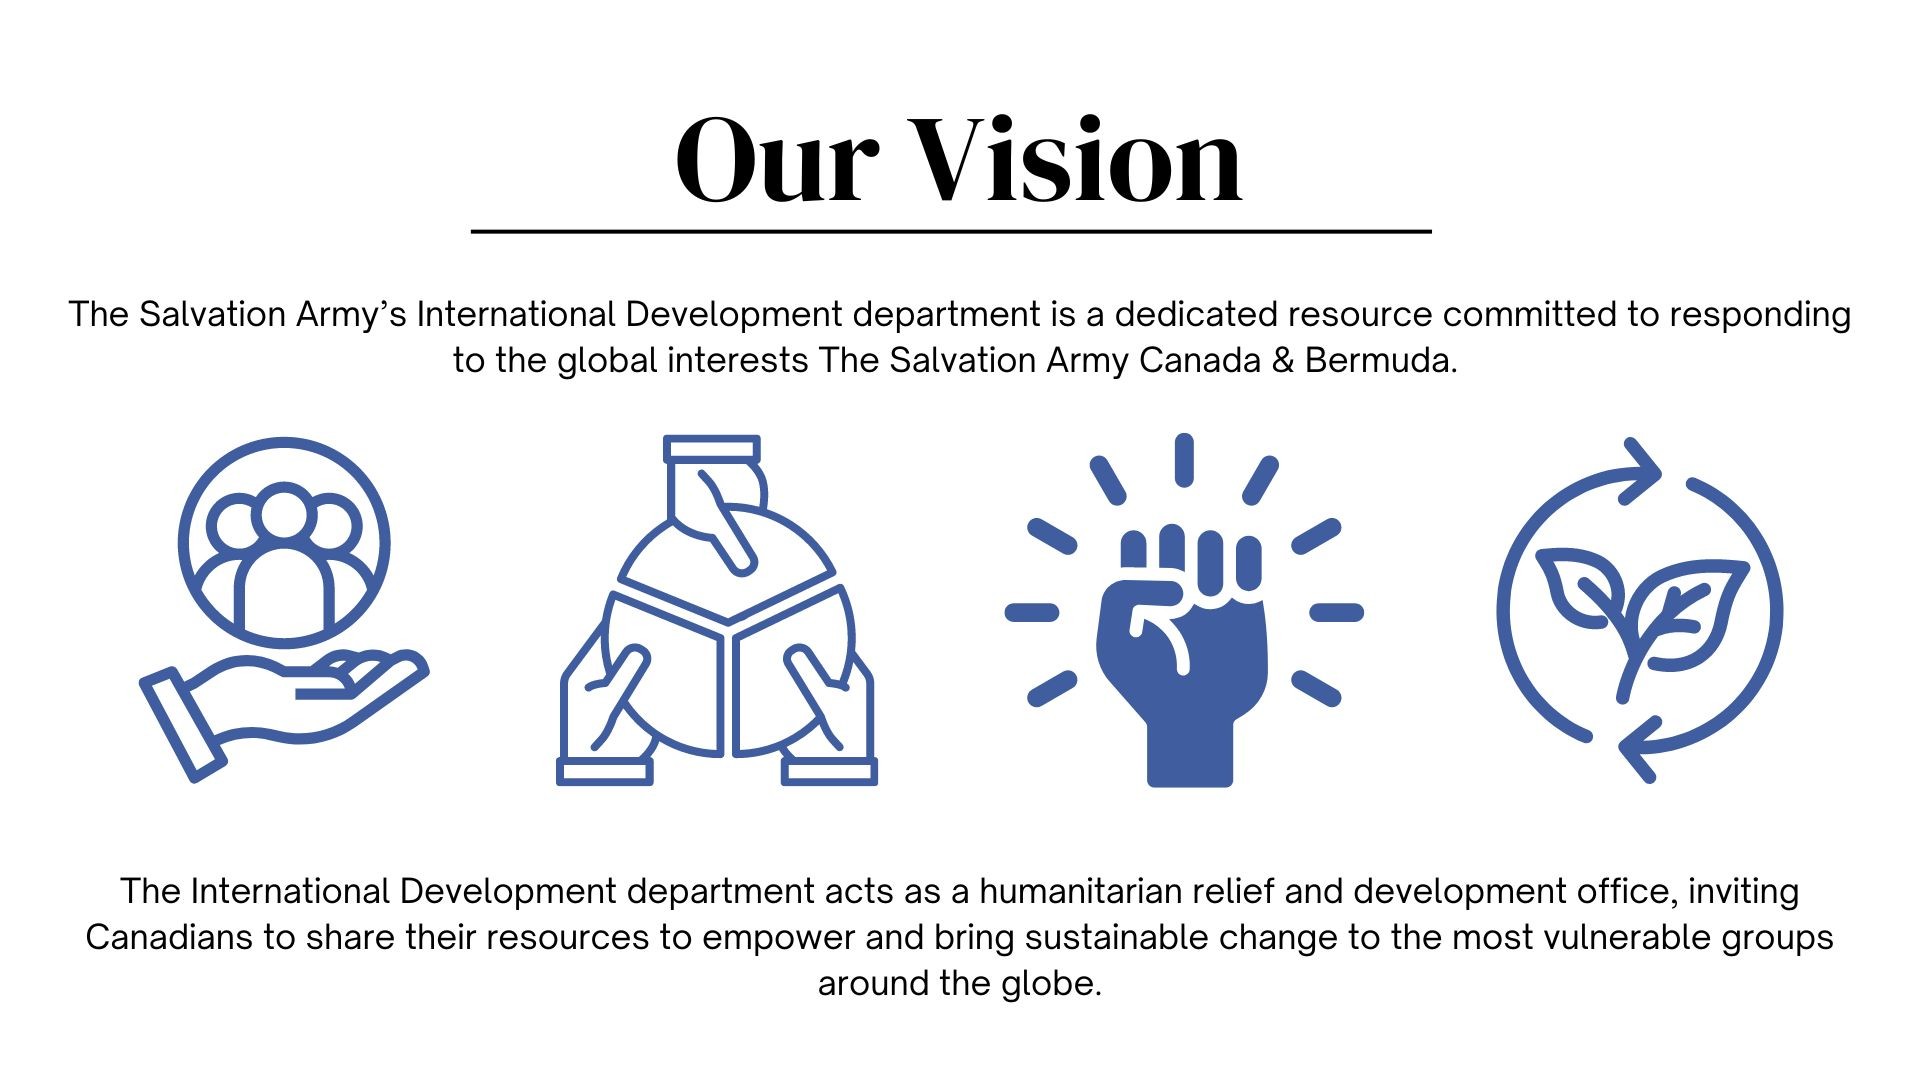 Our Vision: The Salvation Army International Development department is a dedicated resource committed to responding to the global interests the Salvation Army Canada and Bermuda.